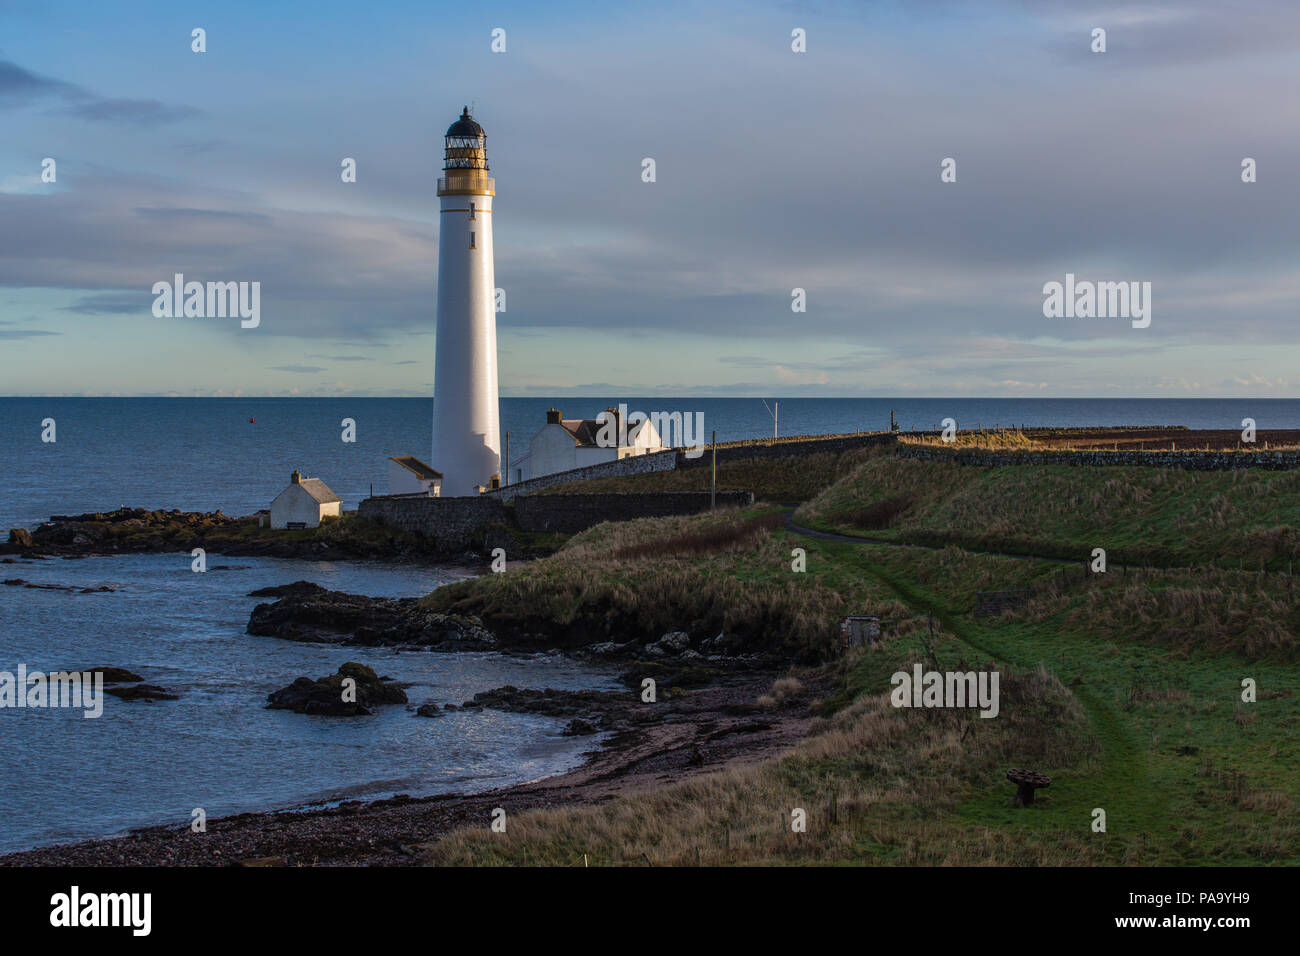 Scurdy phare Ness, Montrose, Ecosse Banque D'Images